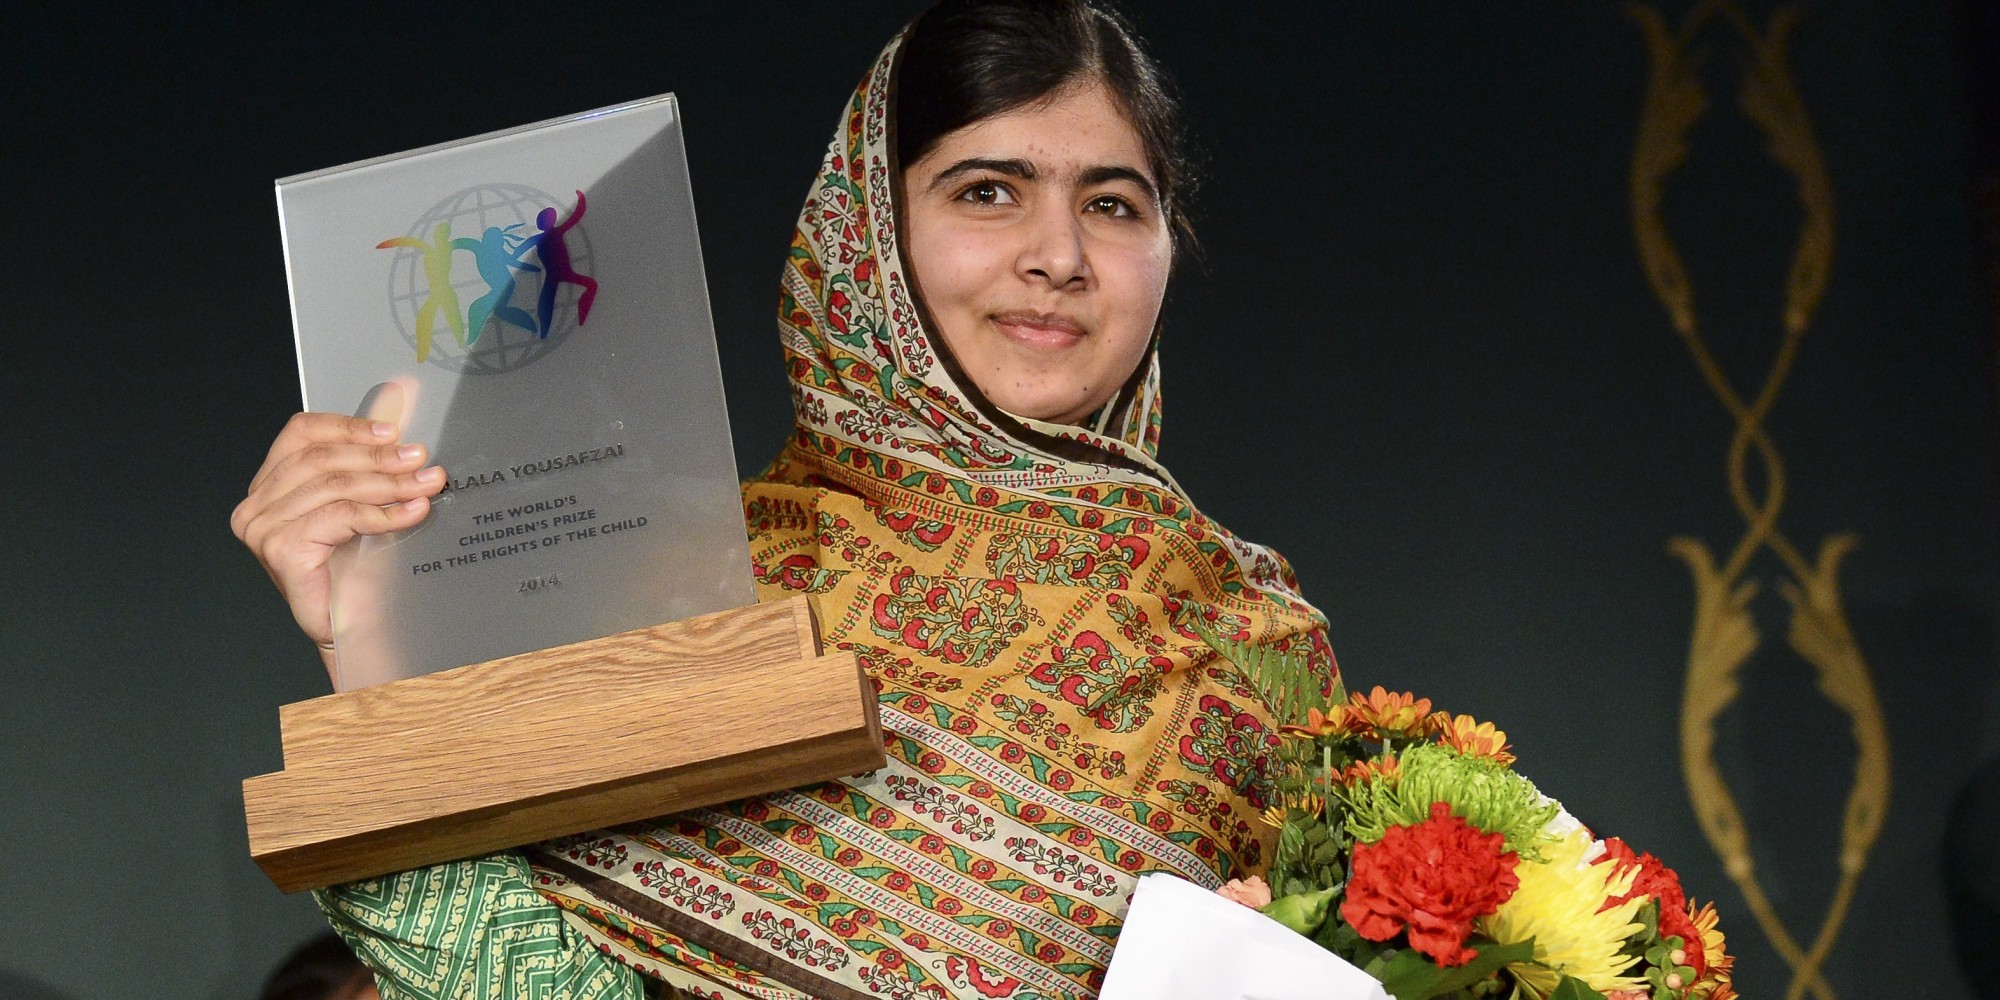 Pakistani activist for female education and Nobel Peace Prize laureate Malala Yousafzai receives the 2014 World's Children Prize for the Rights of the Child during an award ceremony at Gripsholm Castle in Mariefred, western Stockholm on October 29, 2014. AFP PHOTO / JONATHAN NACKSTRAND (Photo credit should read JONATHAN NACKSTRAND/AFP/Getty Images)